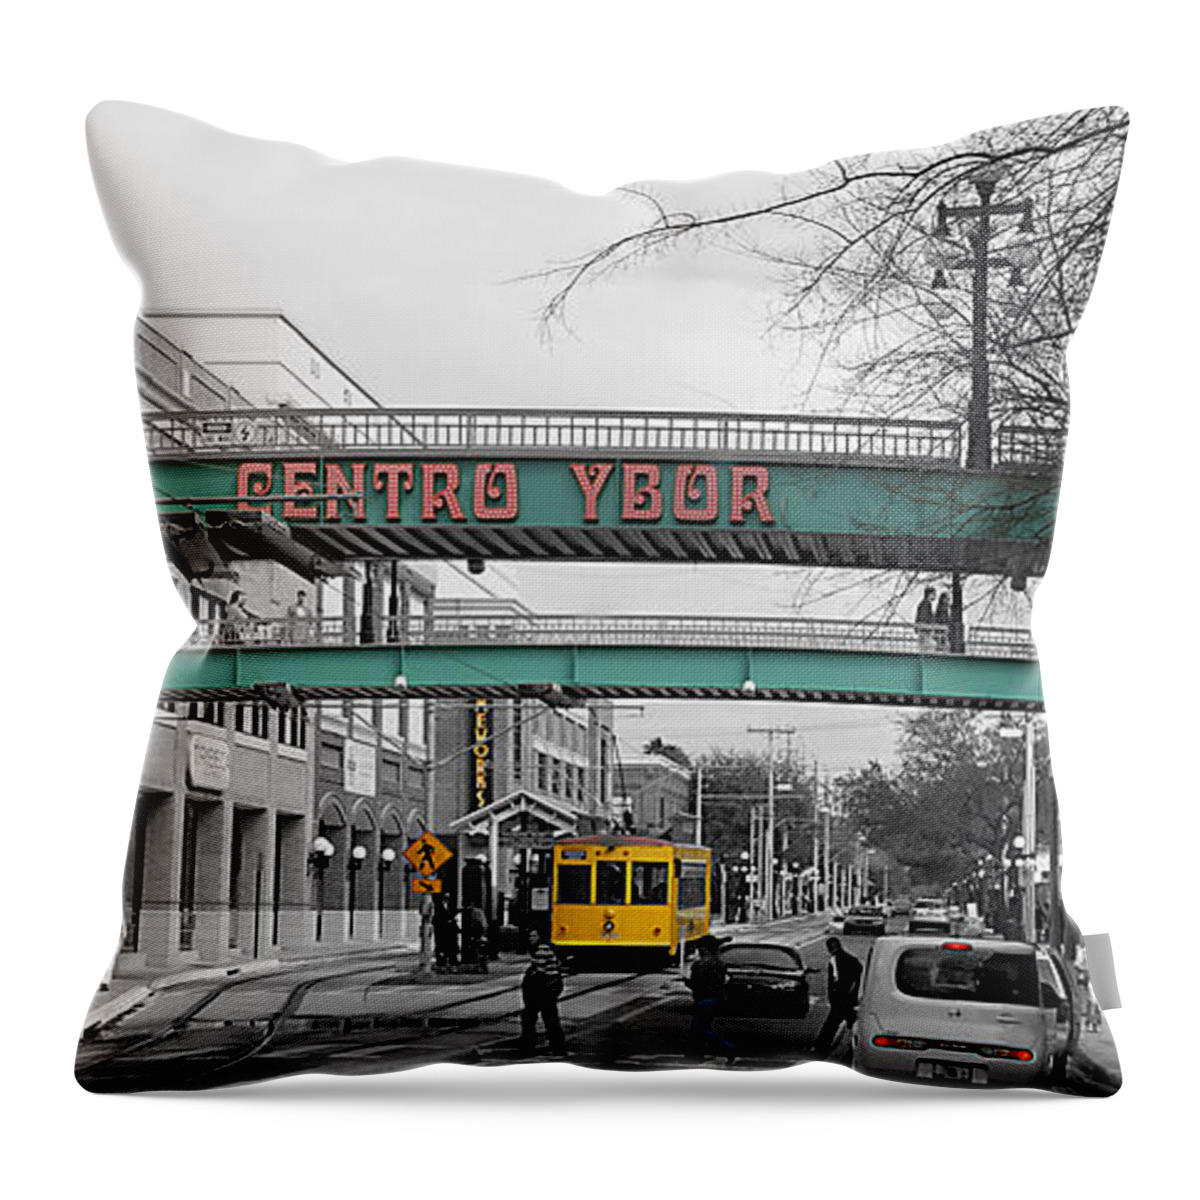 Ybor Throw Pillow featuring the photograph Centro Ybor by Chauncy Holmes